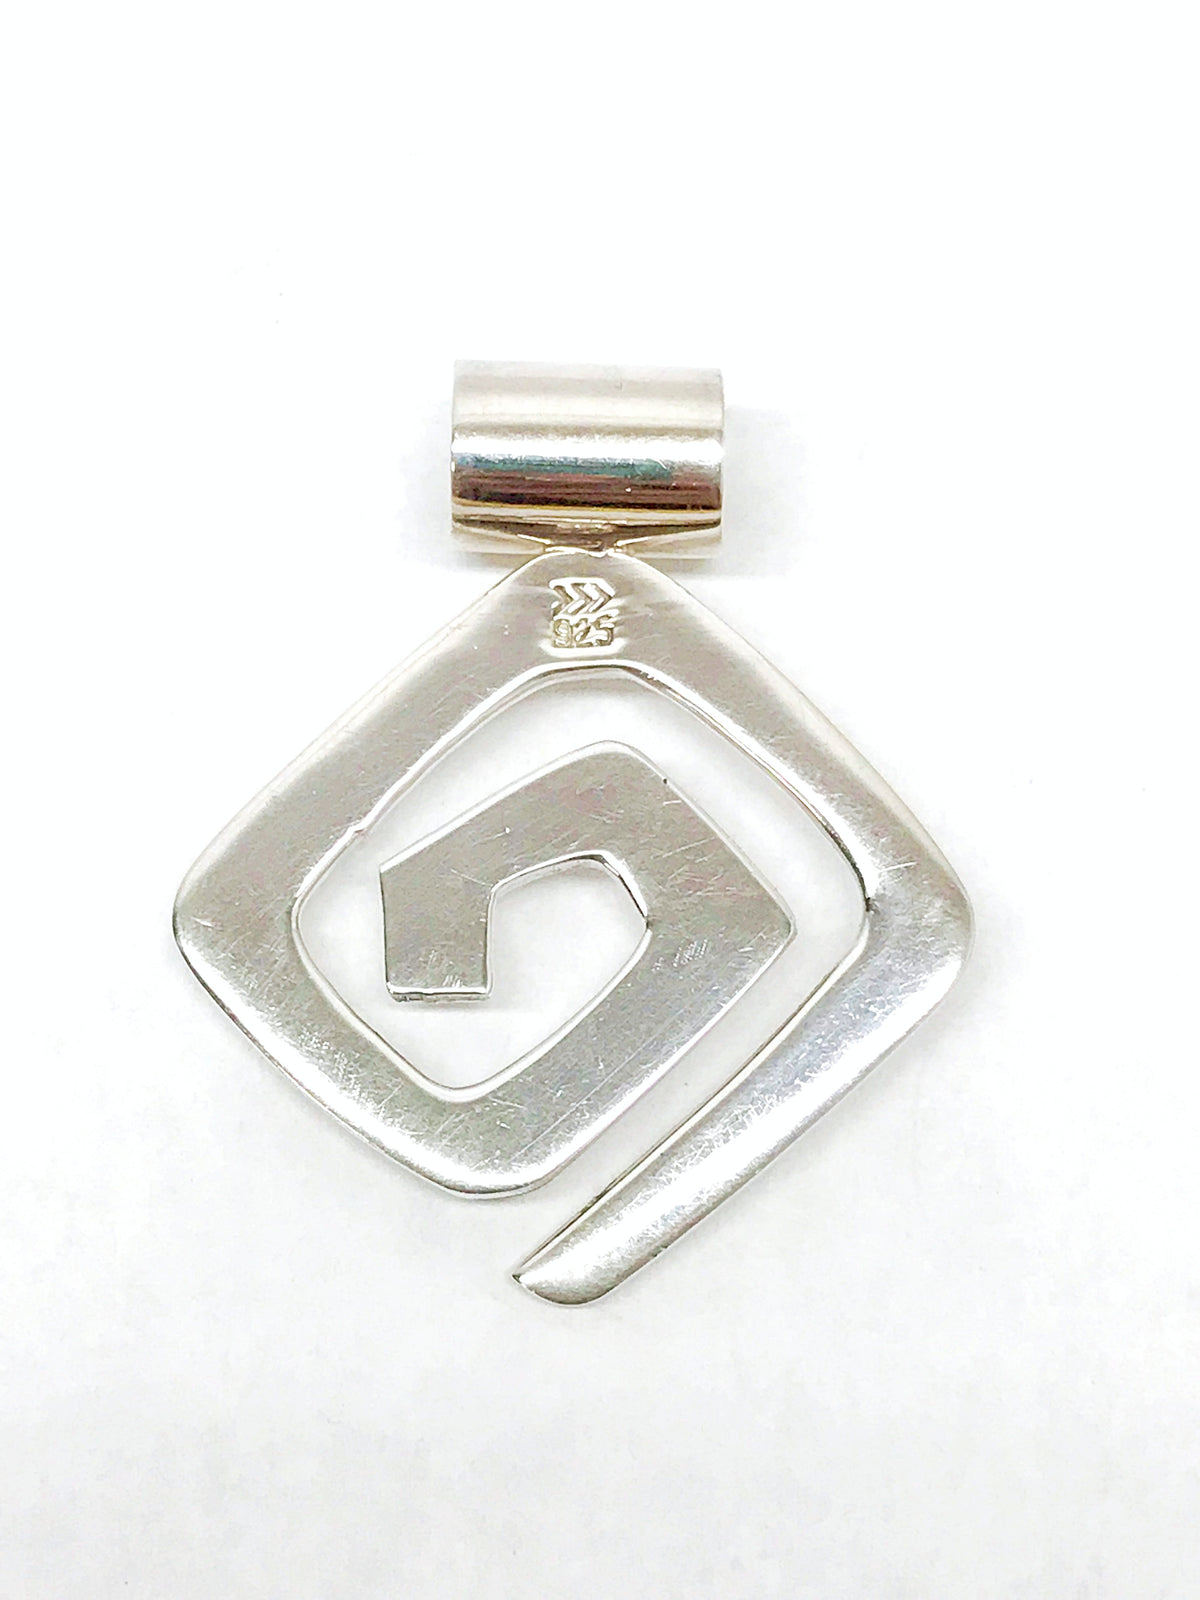 Silpada Retired G1860 Geometric Maze .925 Sterling Silver Pendant - Hers and His Treasures